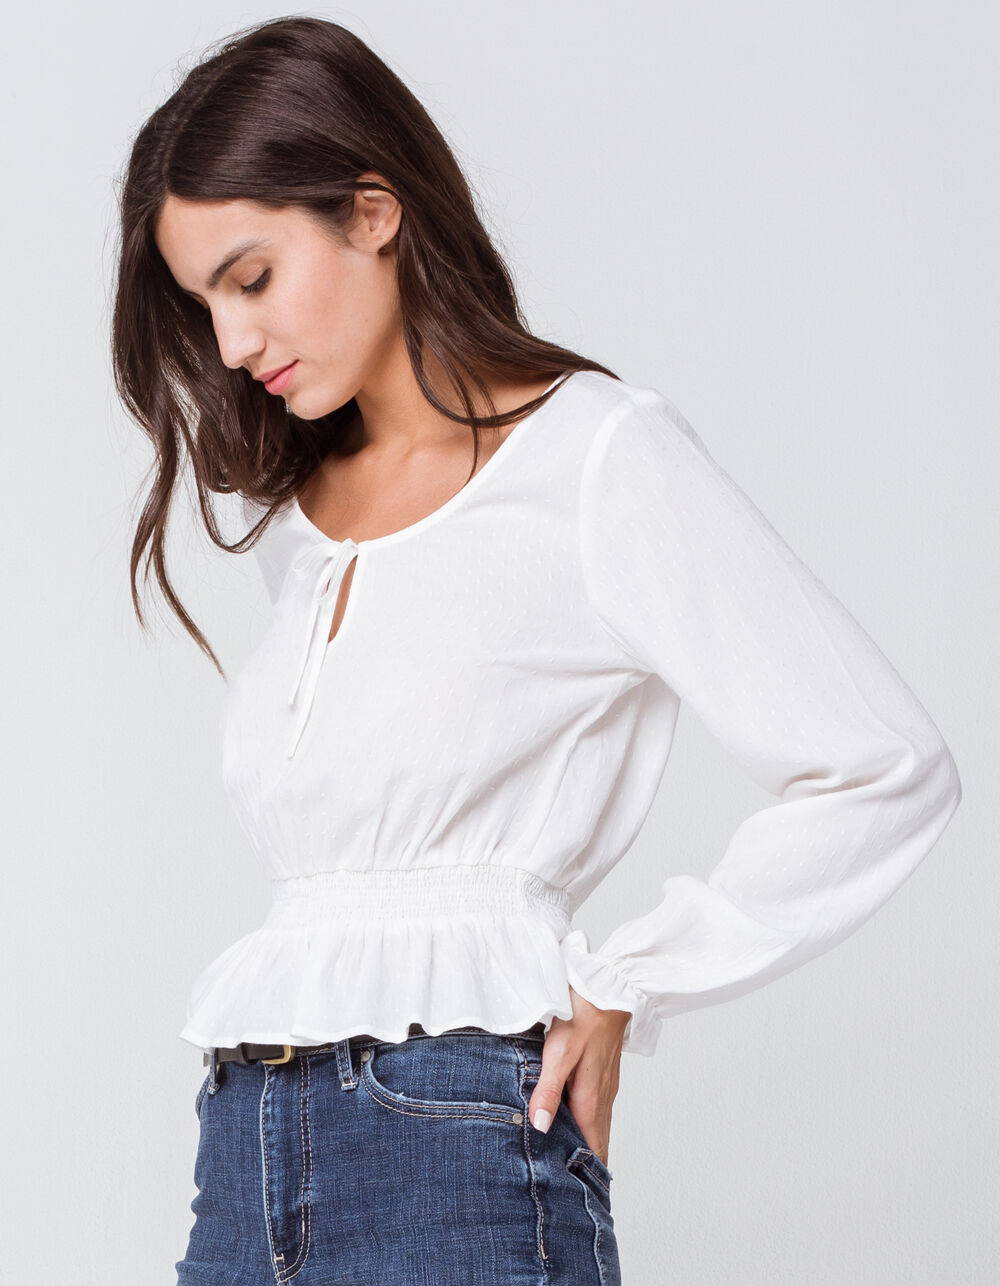 IVY & MAIN Solid Peplum White Womens Peasant Top - WHITE | Tillys